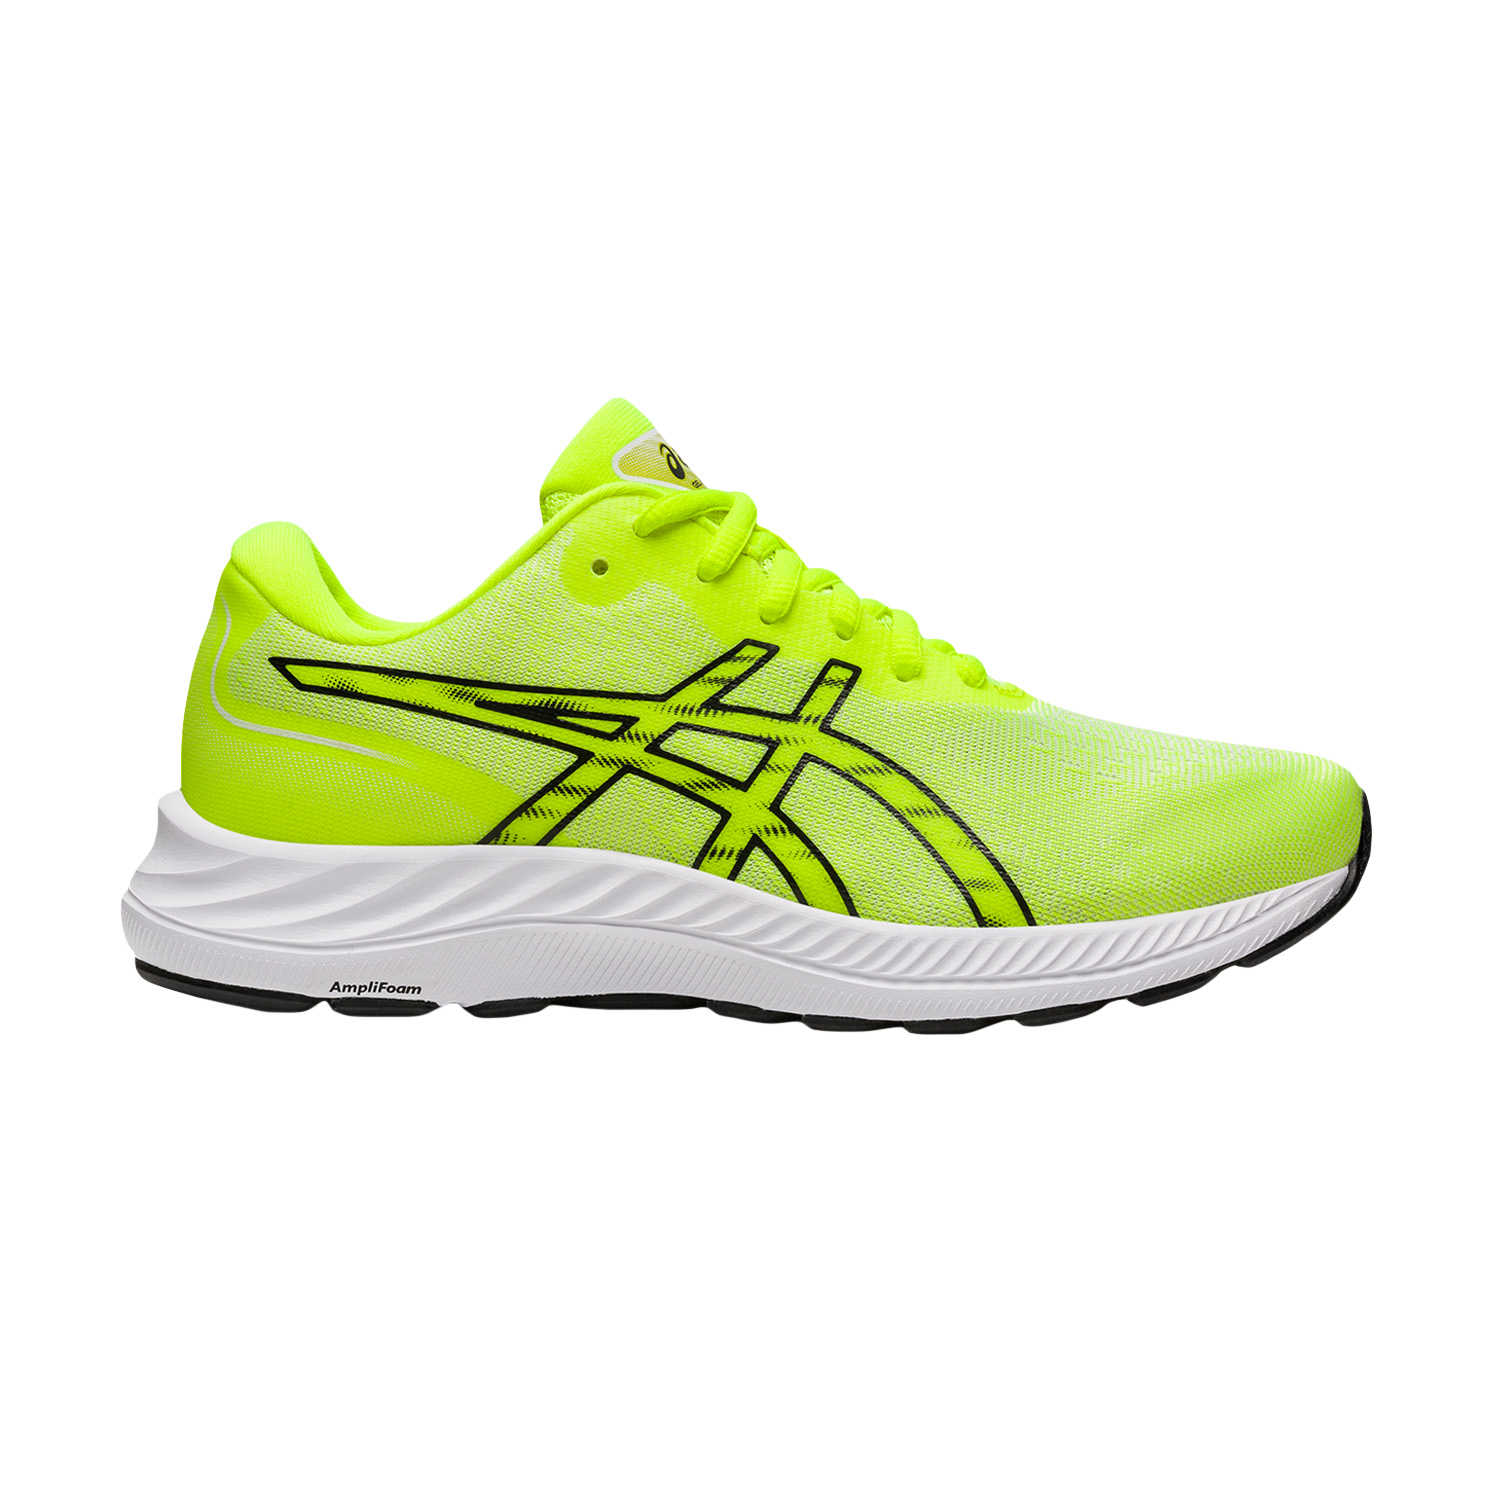 Asics Gel Excite 9 Women's Running Shoes - Safety Yellow/Black